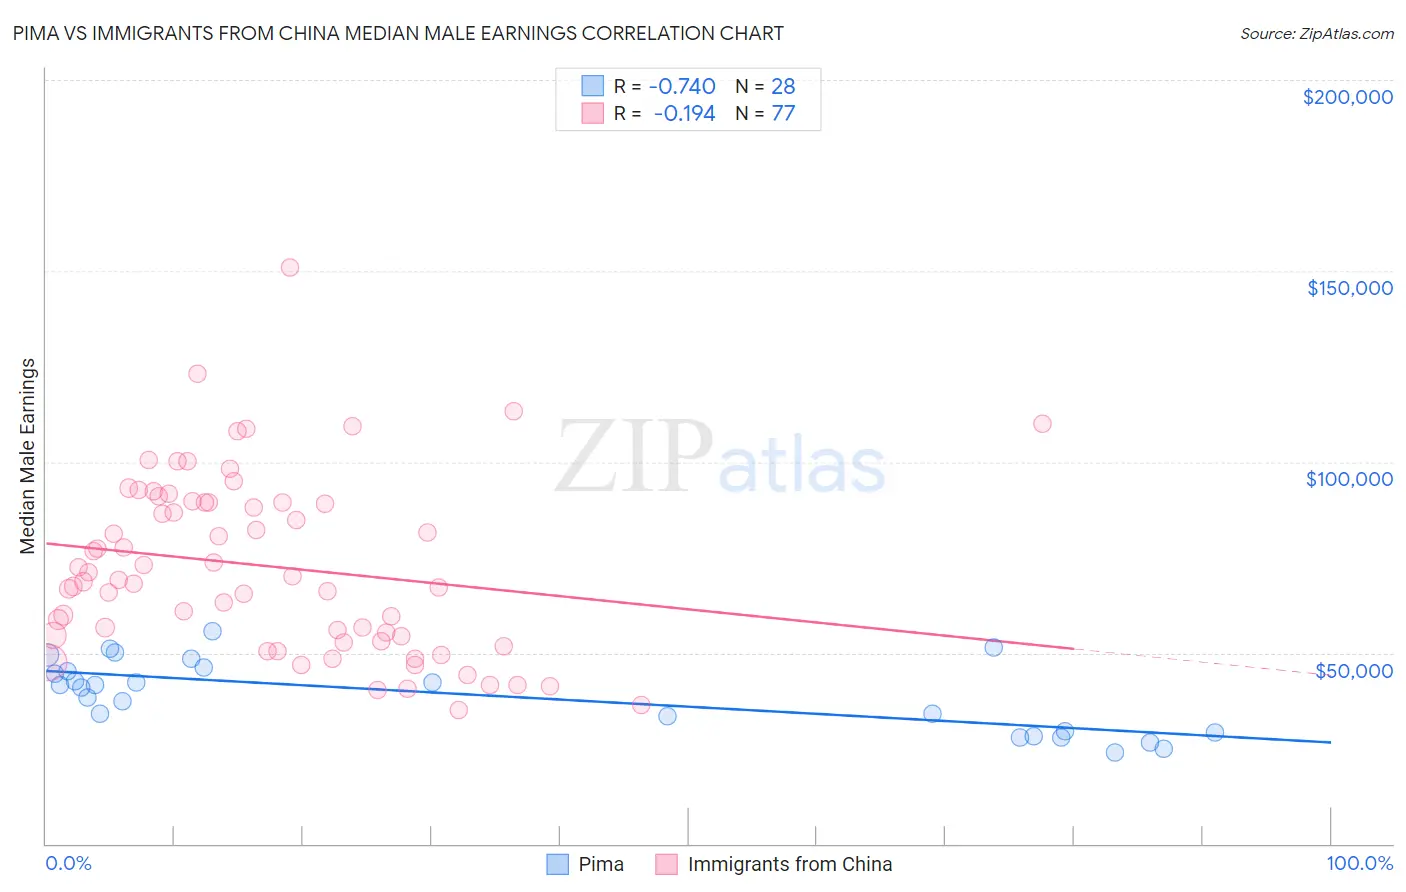 Pima vs Immigrants from China Median Male Earnings